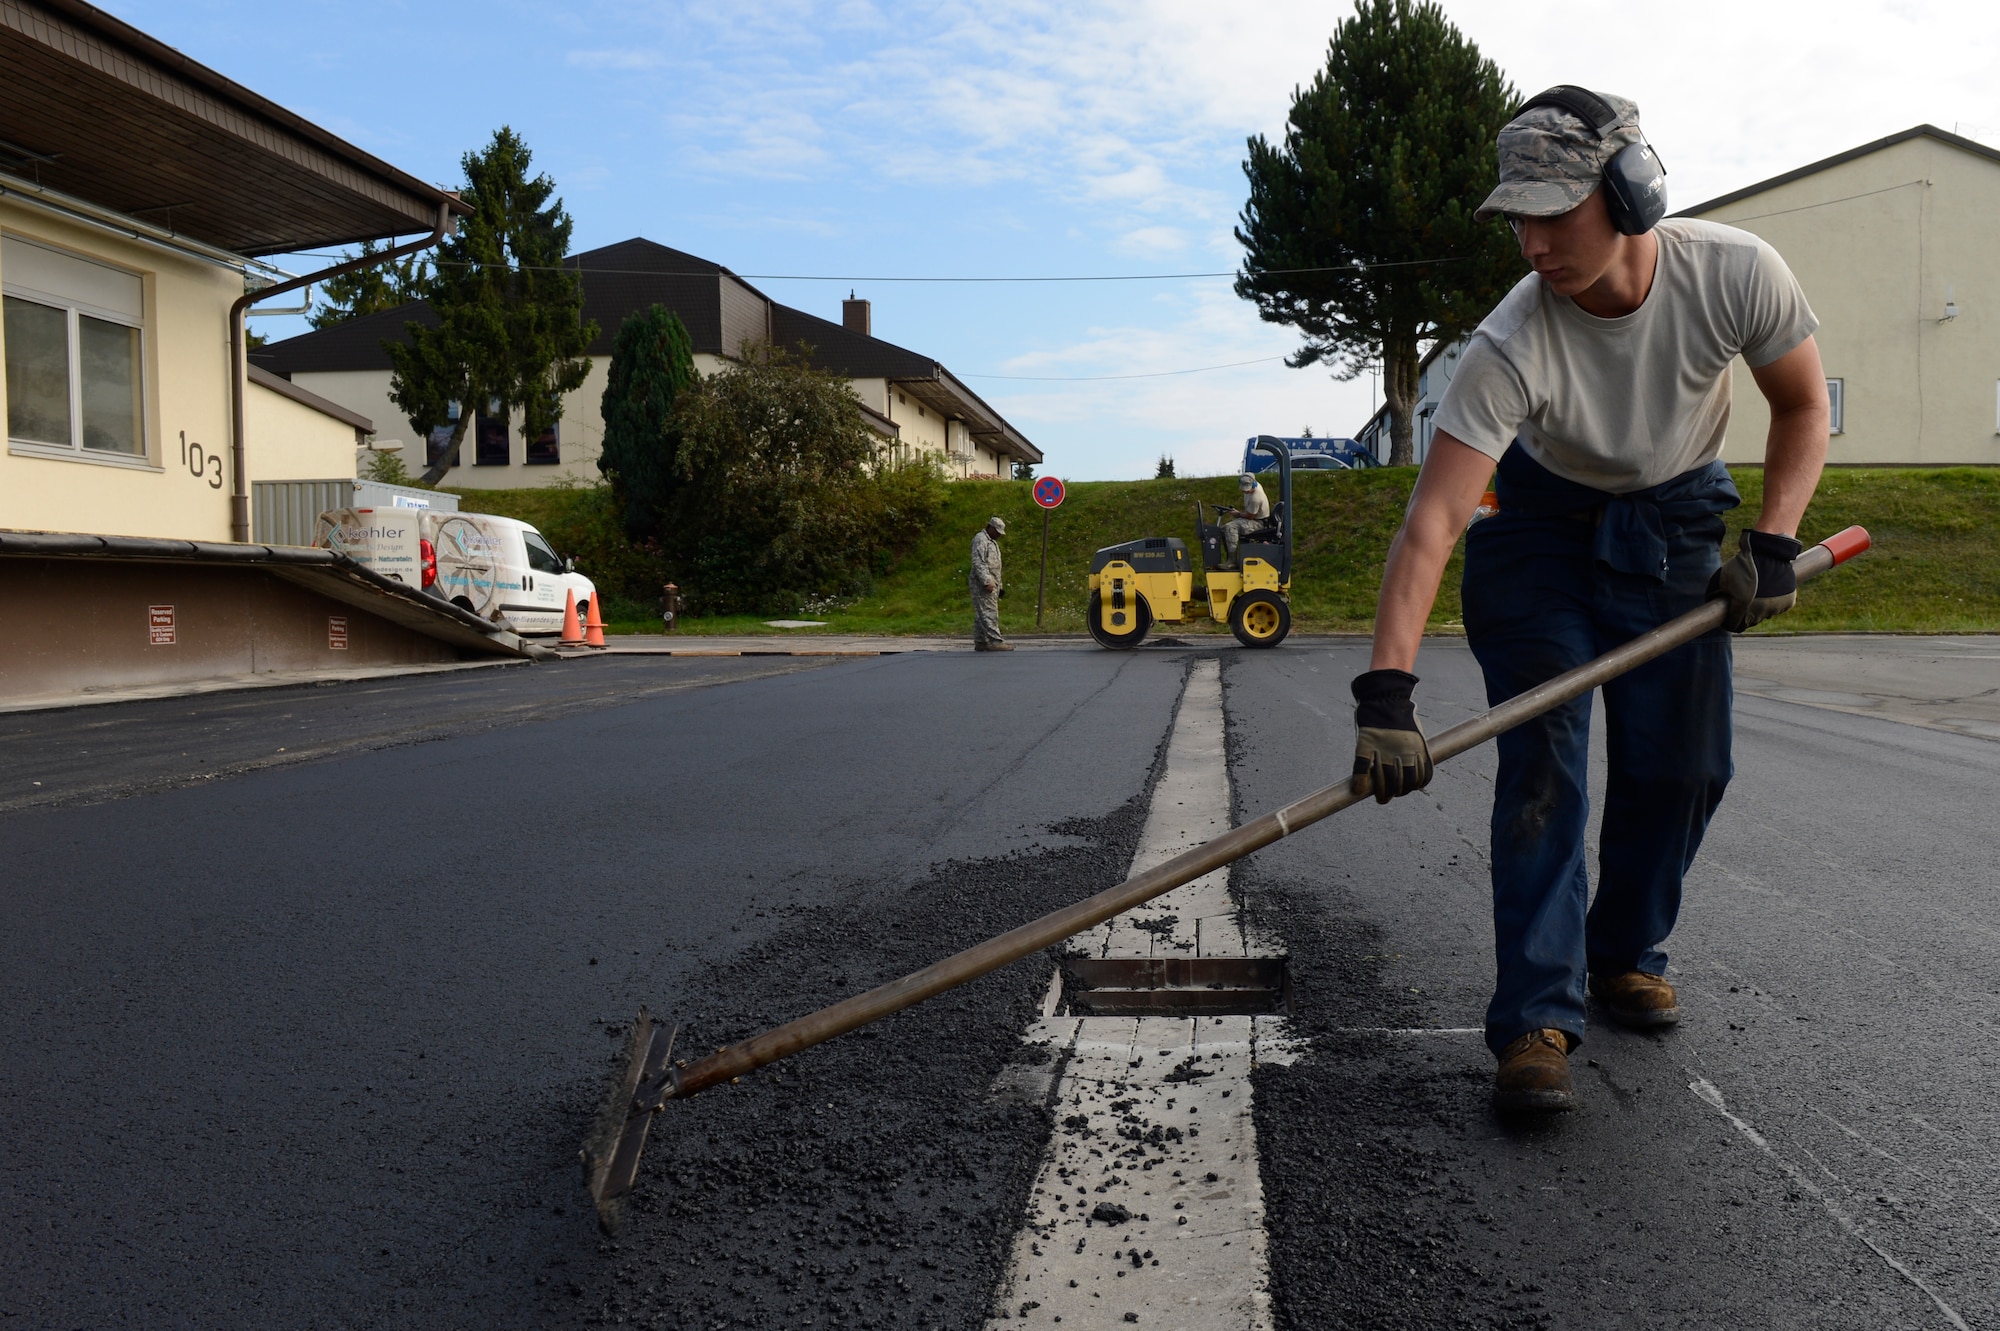 U.S. Air Force Senior Airman Stephen Zemke, 52nd Civil Engineer Squadron pavement and equipment journeyman from Hilo, Hawaii, refines the edge of the freshly laid asphalt during a road repair at Spangdahlem Air Base, Germany, Sept. 12, 2014. The 52nd CES pavement and heavy equipment operators maintain and repair concrete and asphalt on Spangdahlem roadways and flightline. (U.S. Air Force photo by Staff Sgt. Christopher Ruano/Released)